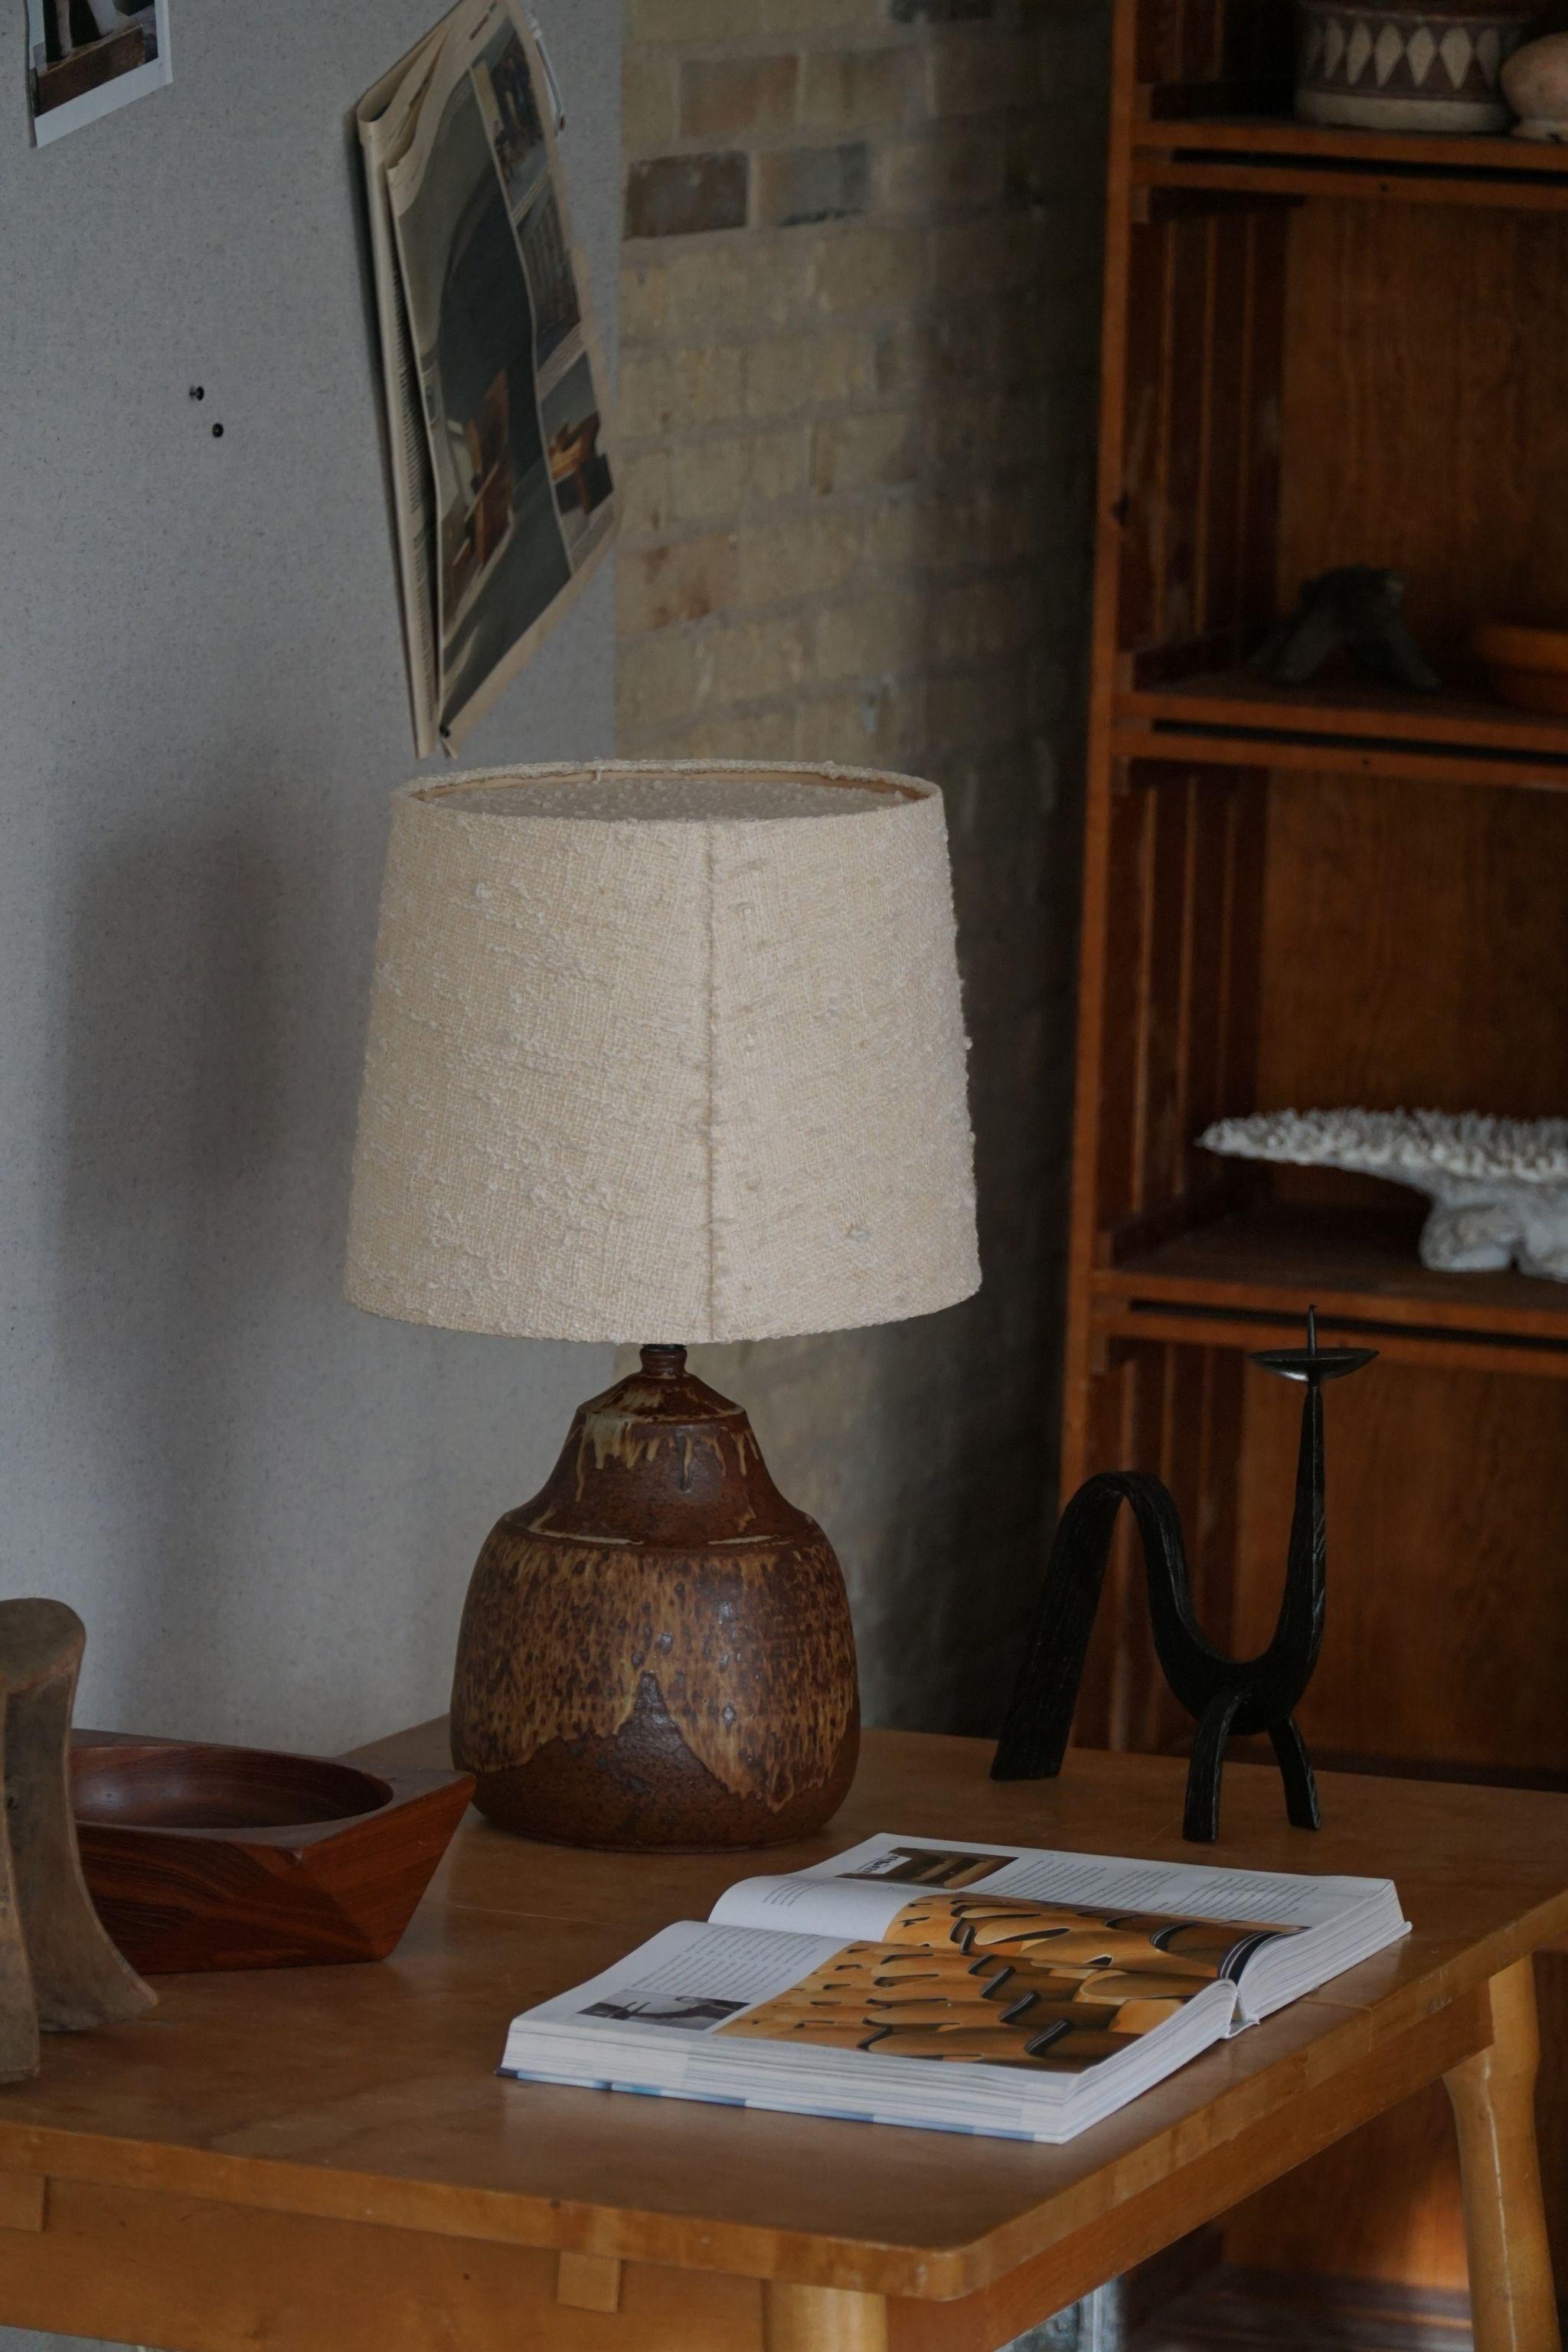 Danish Modern organic shaped stoneware table lamp. Made in various earthern / brown colors. Made in the 1970s by Visby Keramik, signed underneath. 

This item is in a great vintage condition. This beautiful and calm lighting complements many types